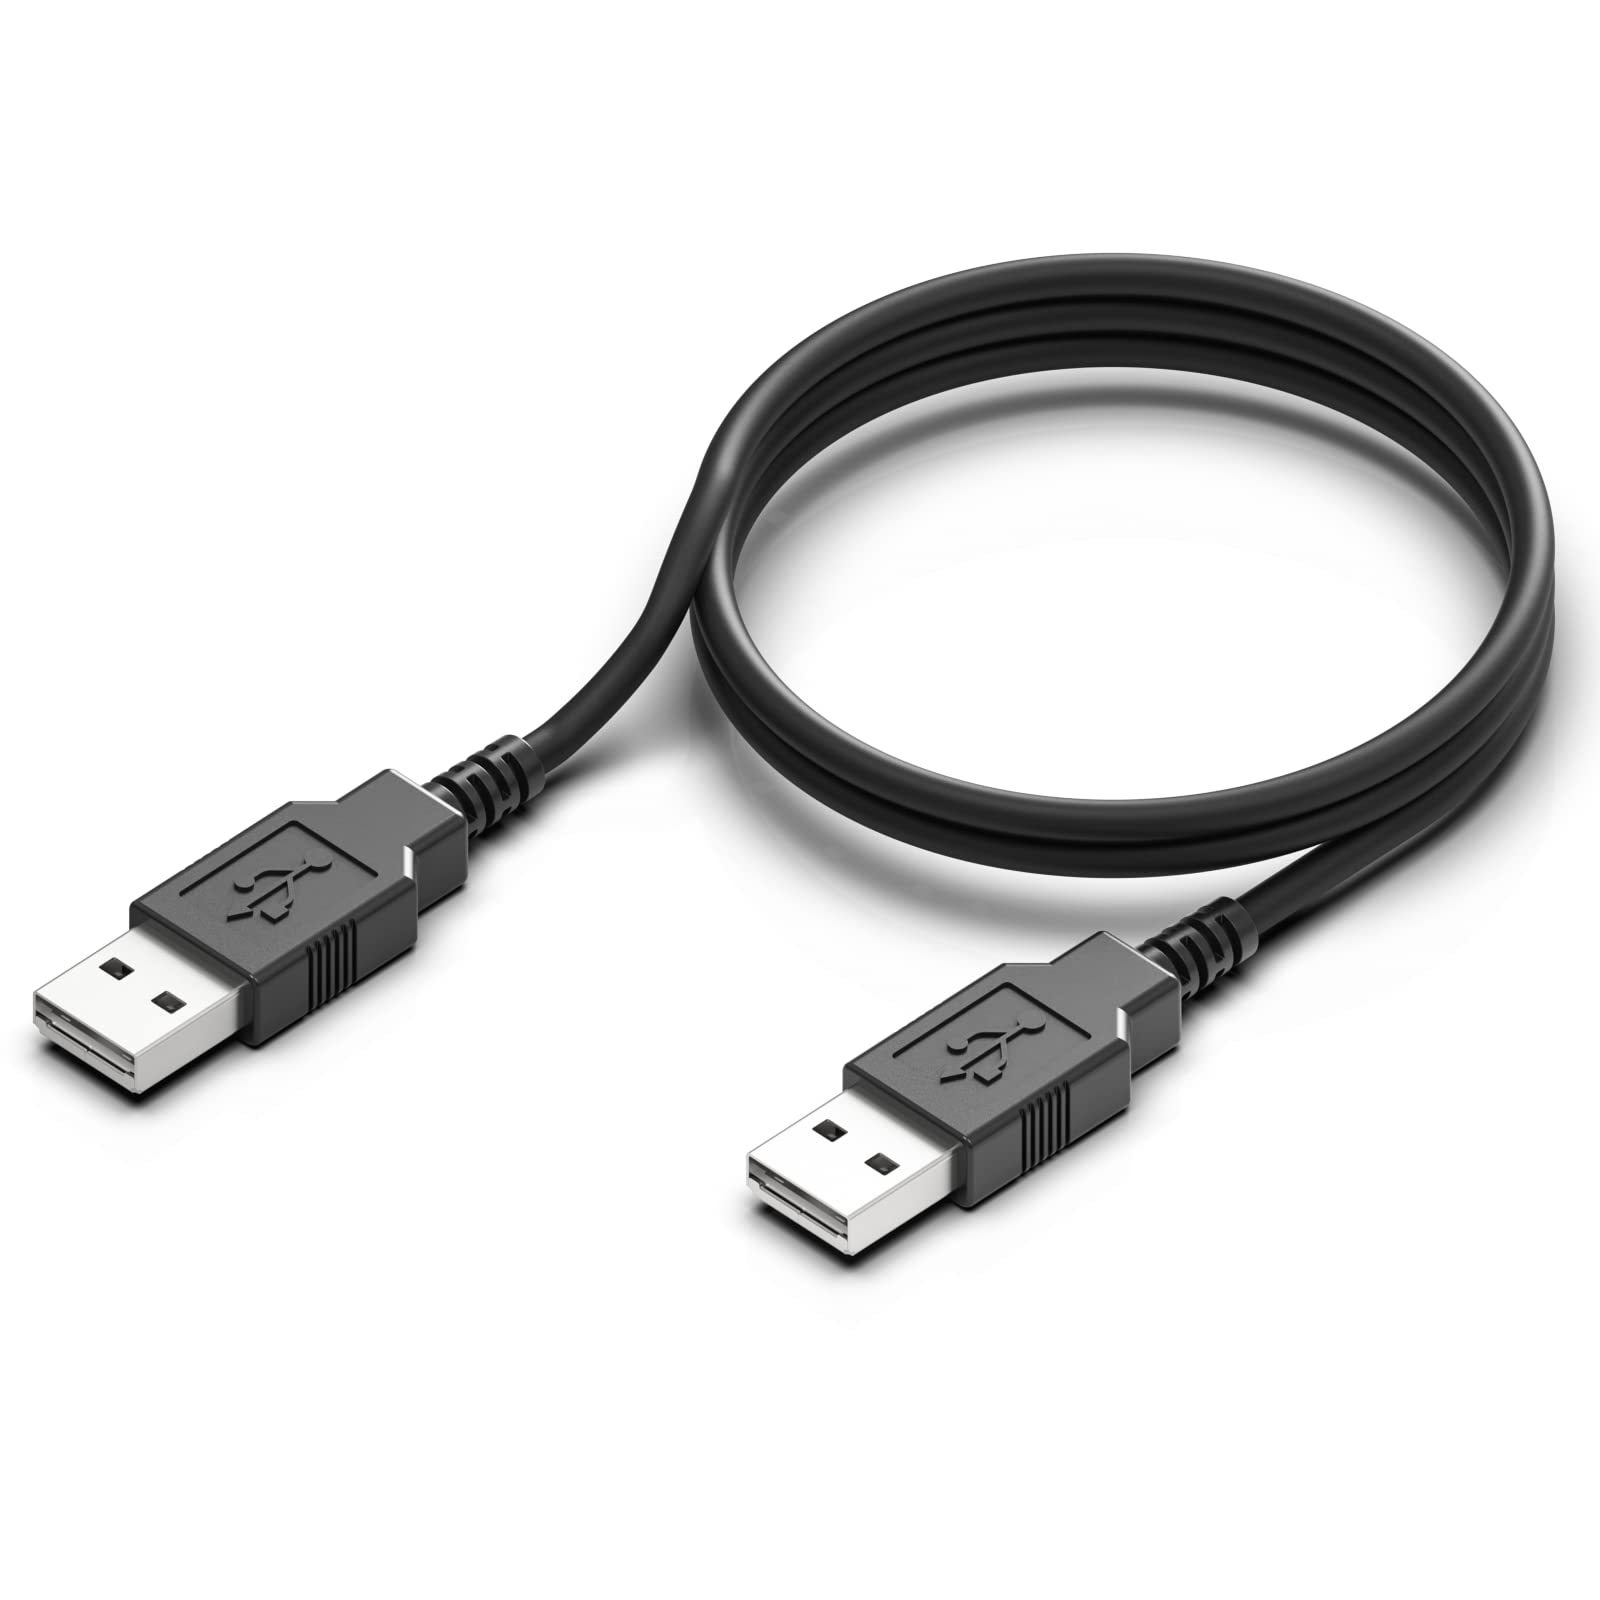 https://www.zebrs.com/uploads/zebrs/products/lapster-15-mtr-usb-20-type-a-male-to-usb-a-male-cable-for-computer-and-laptop-106054_l.jpg